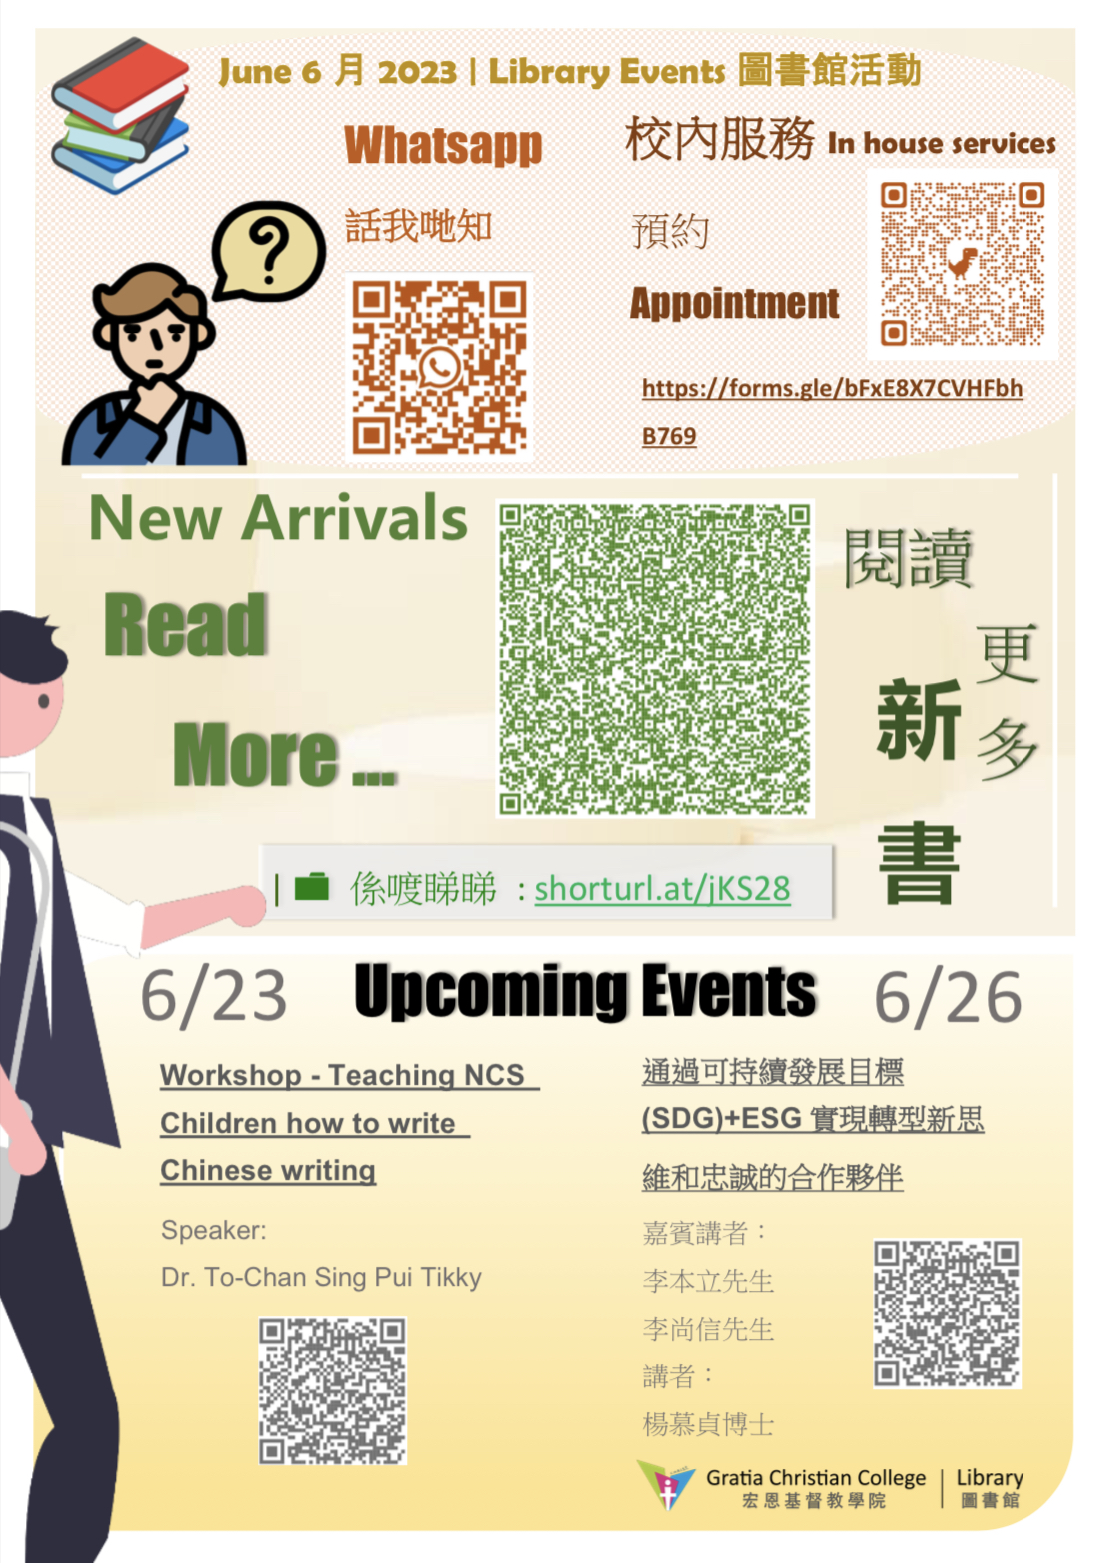 [LIB] Events - 📚 6月新書New Arrivals, Events, and 校內服務招募 In-House Services